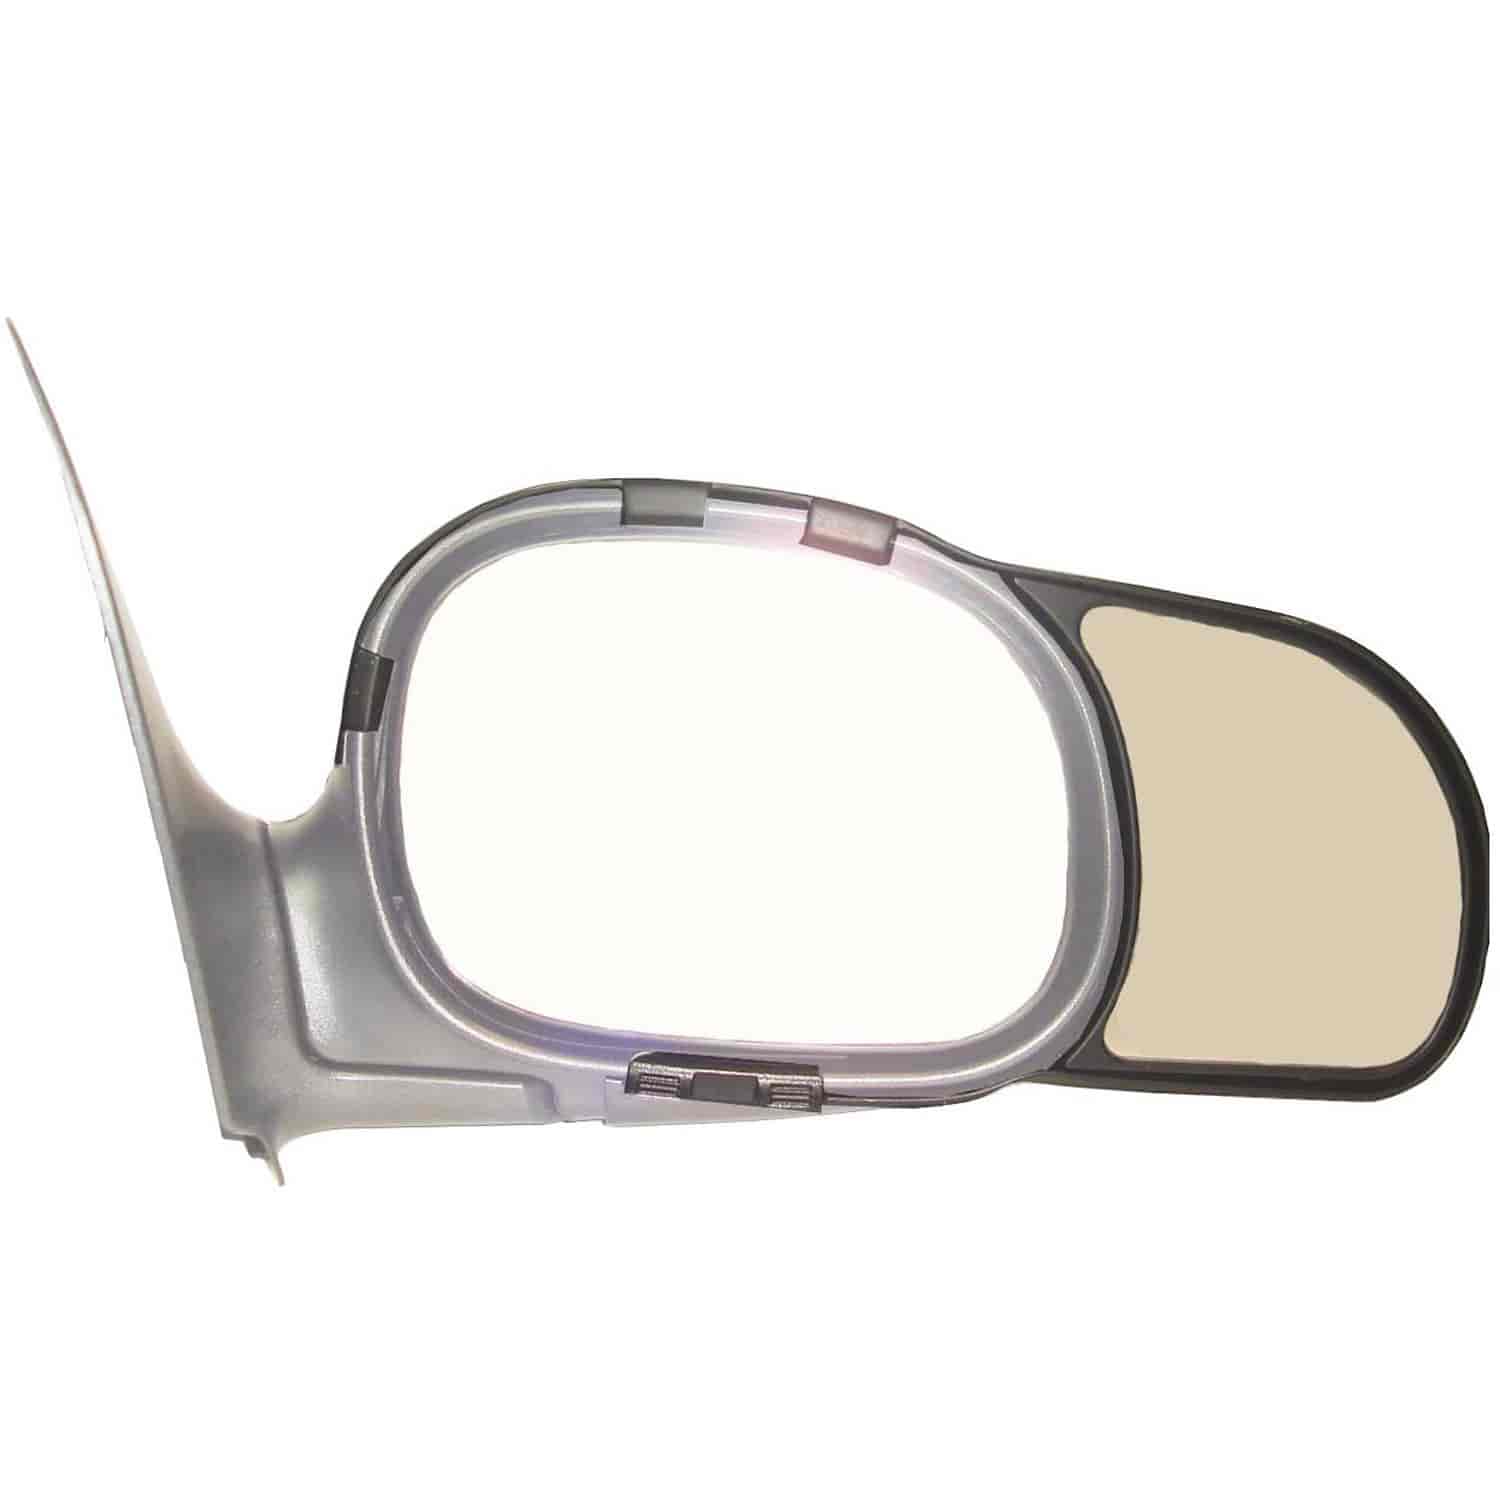 Snap-On Towing Mirrors Fits 1997 to 2003 Ford